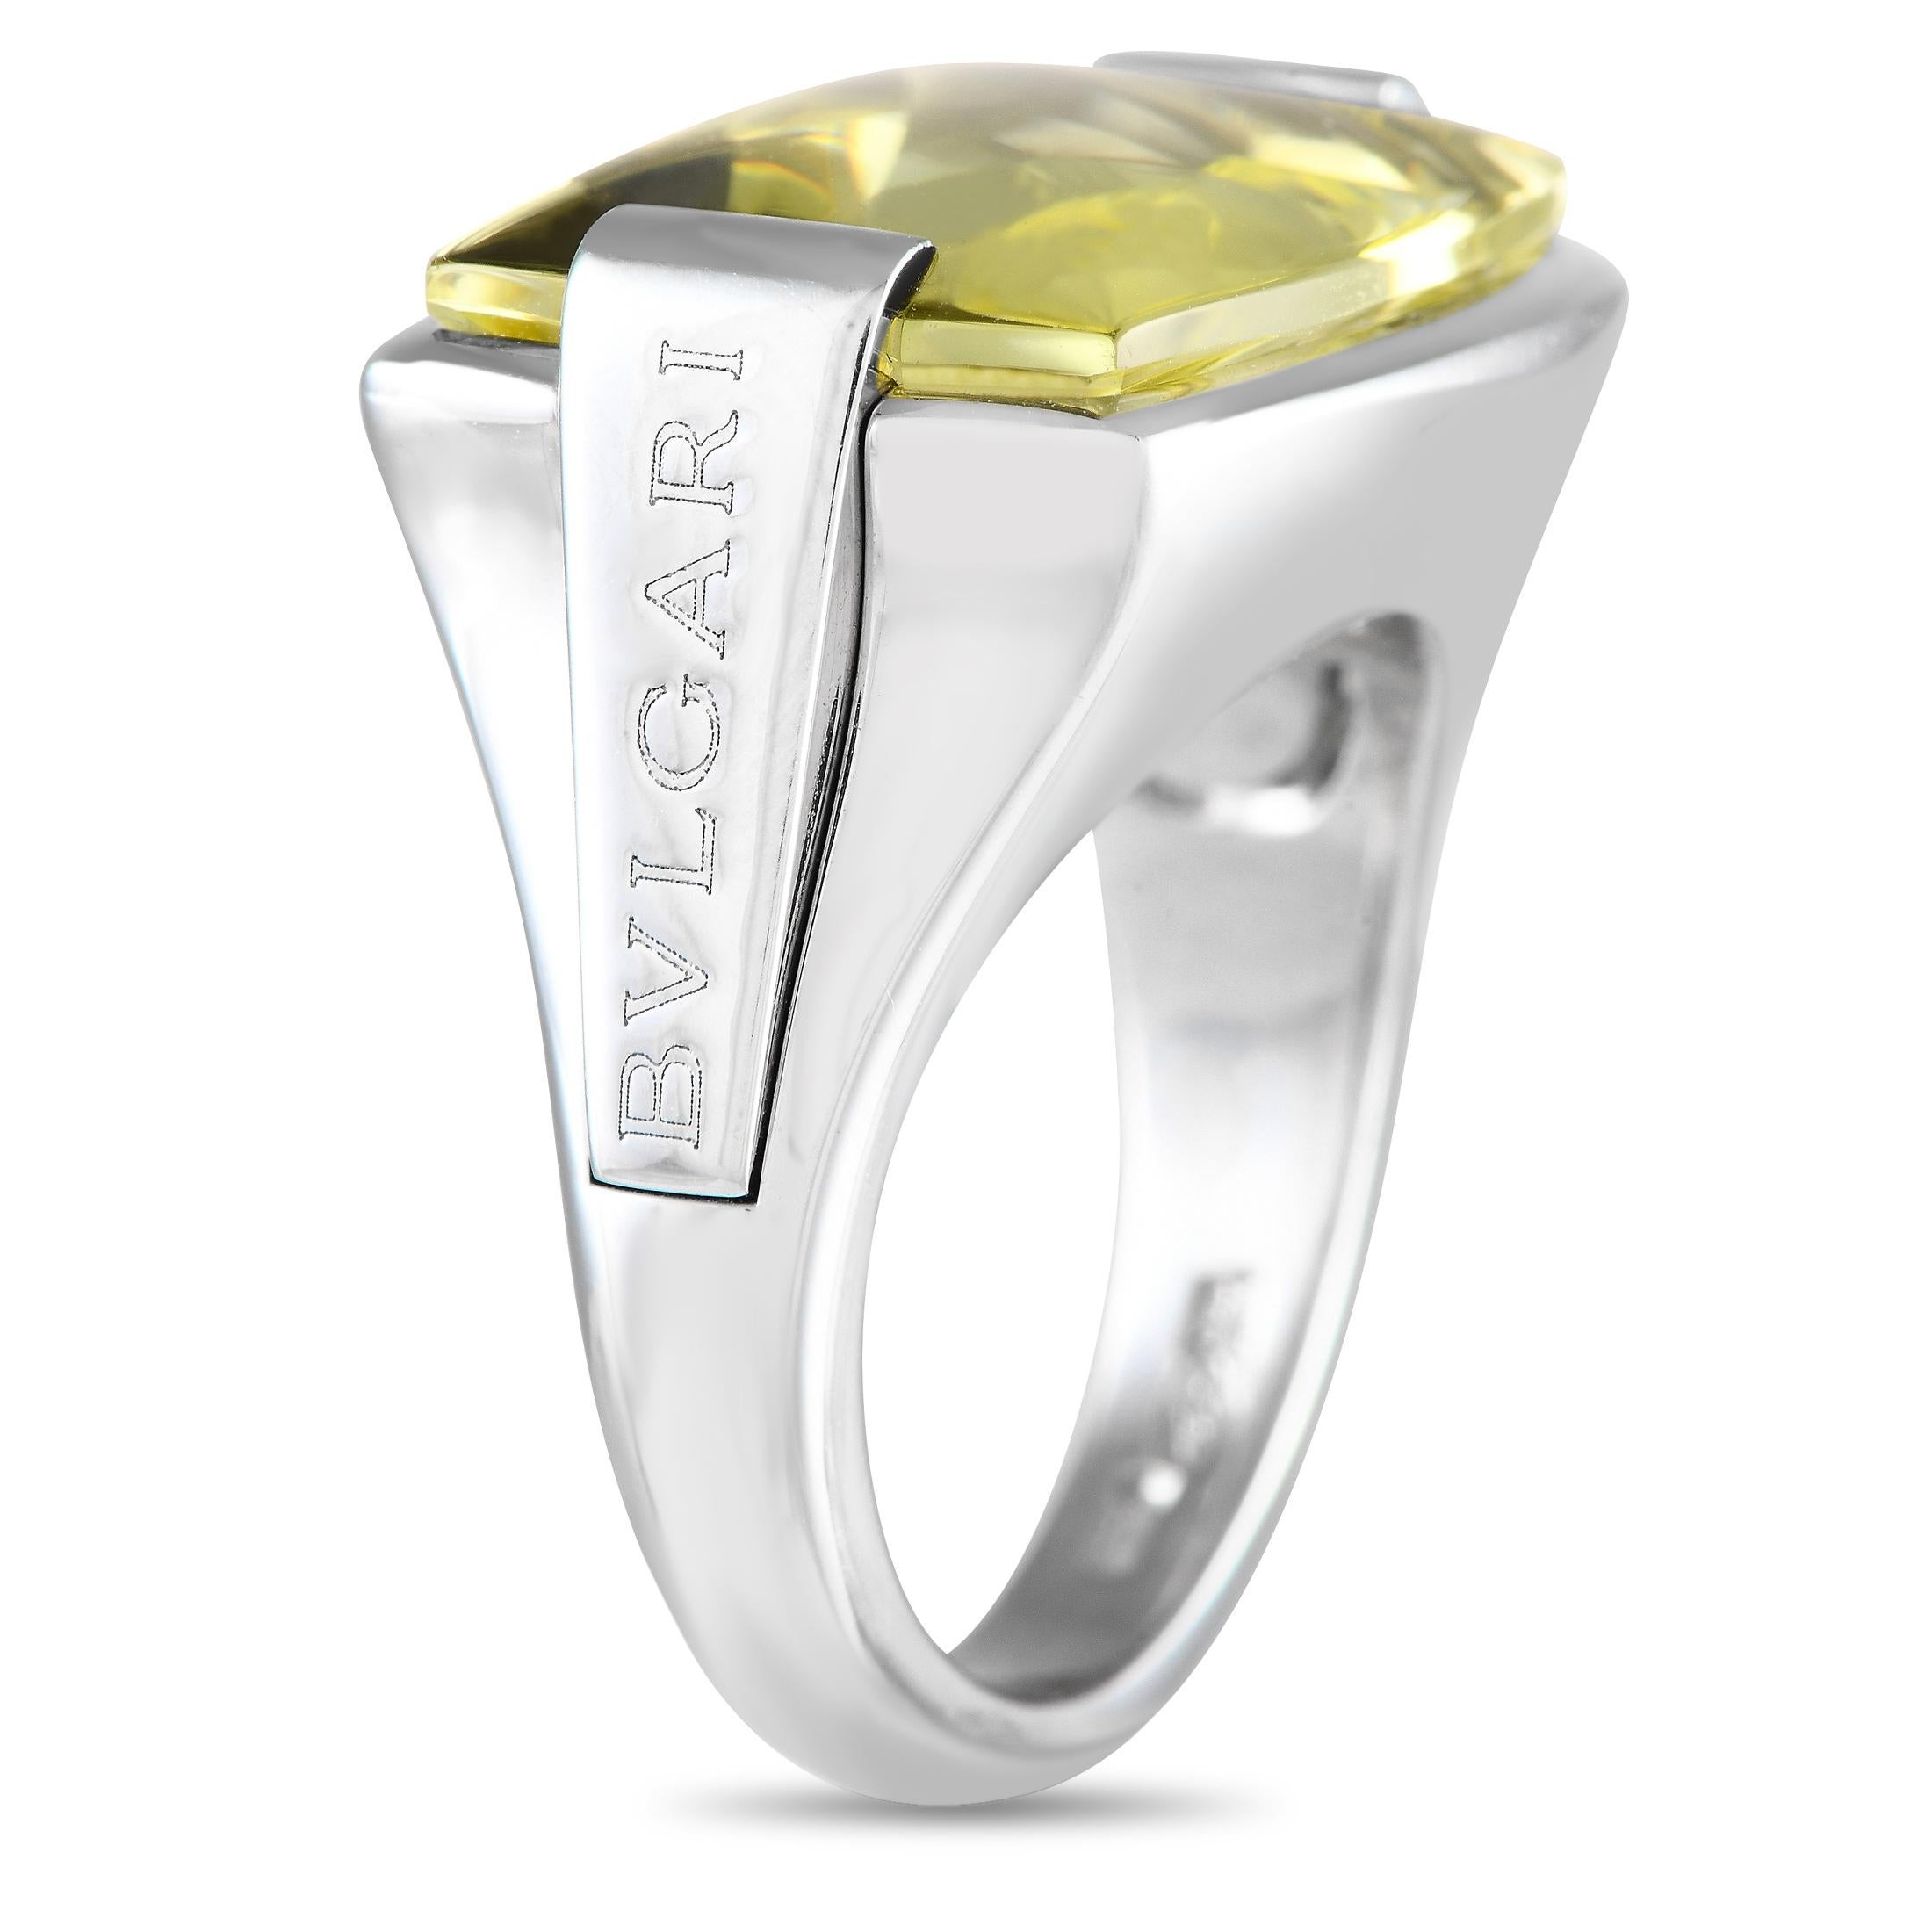 Liven up your style with a bold and bright bauble like this Bvlgari Allegra ring. Crafted in 18K white gold, this striking piece holds a large, fancy-cut, rectangular-shaped lemon citrine. The ring's top dimensions measure 15mm x 14mm. The ring has